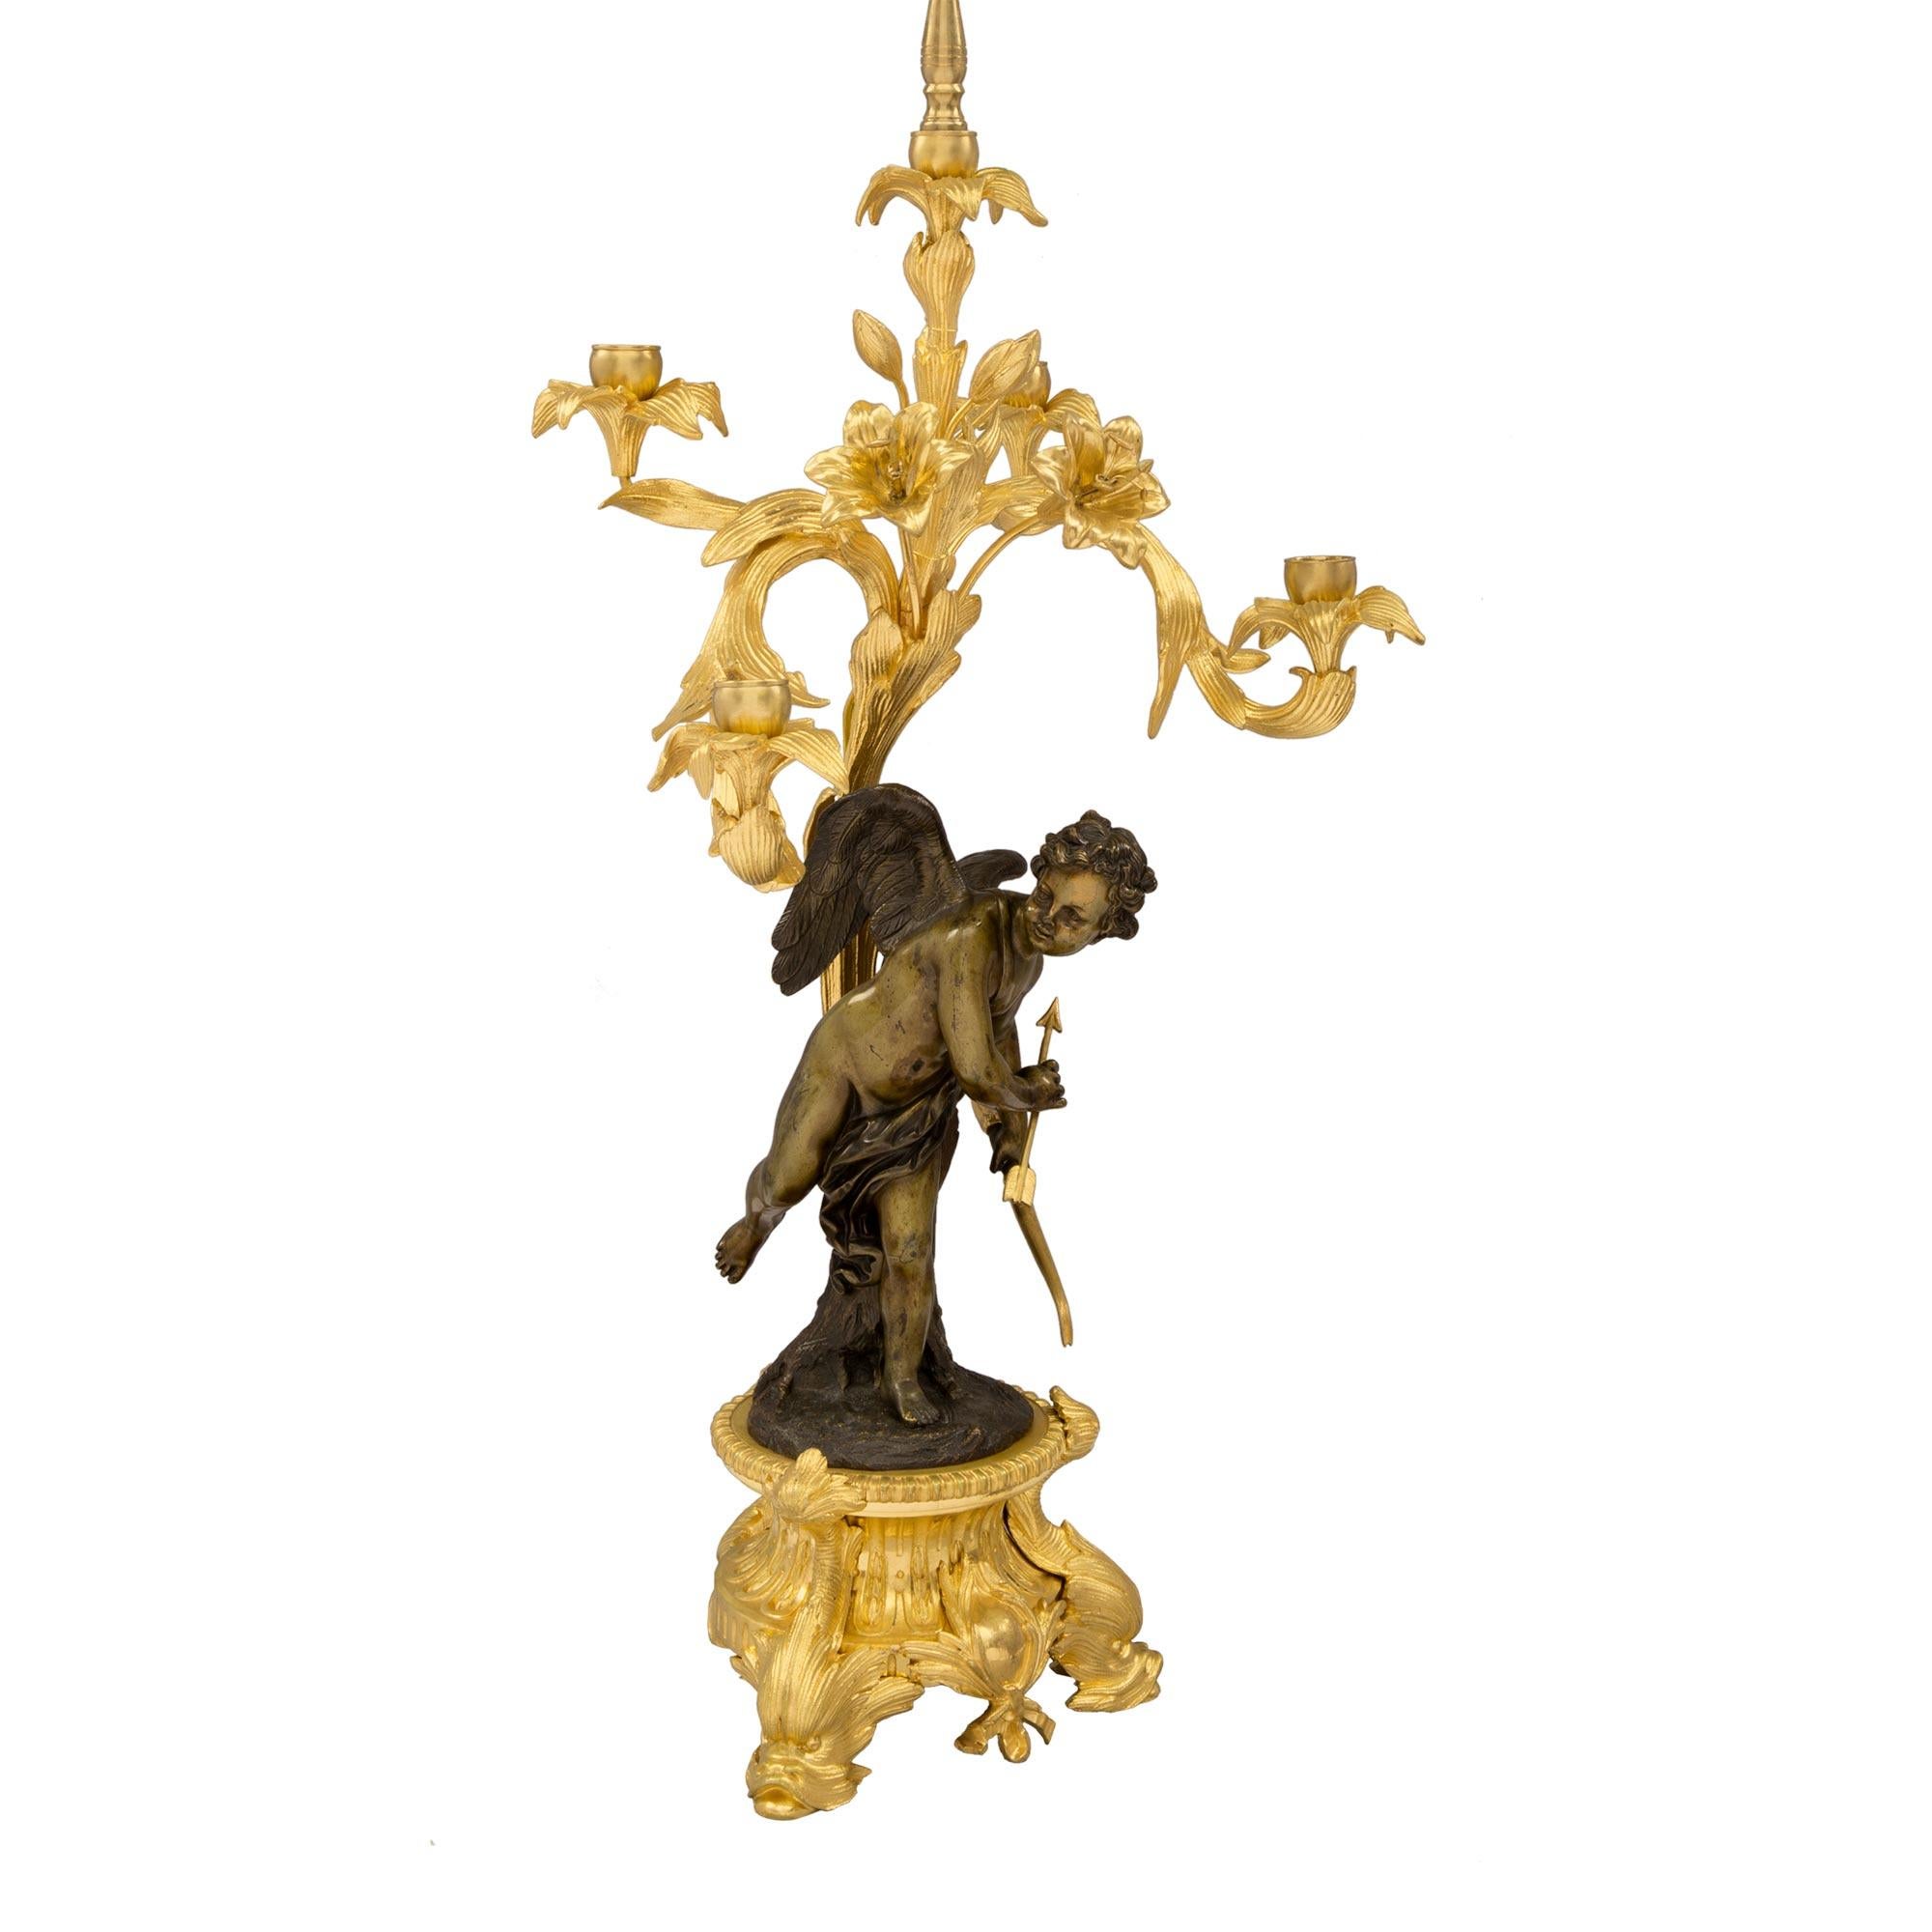 A spectacular pair of French 19th century Belle Époque period, five arm ormolu and patinated bronze, candelabras attributed to Henry Picard. Each lamp is raised by a circular ormolu base with impressive dolphins, a central cabochons amidst foliate